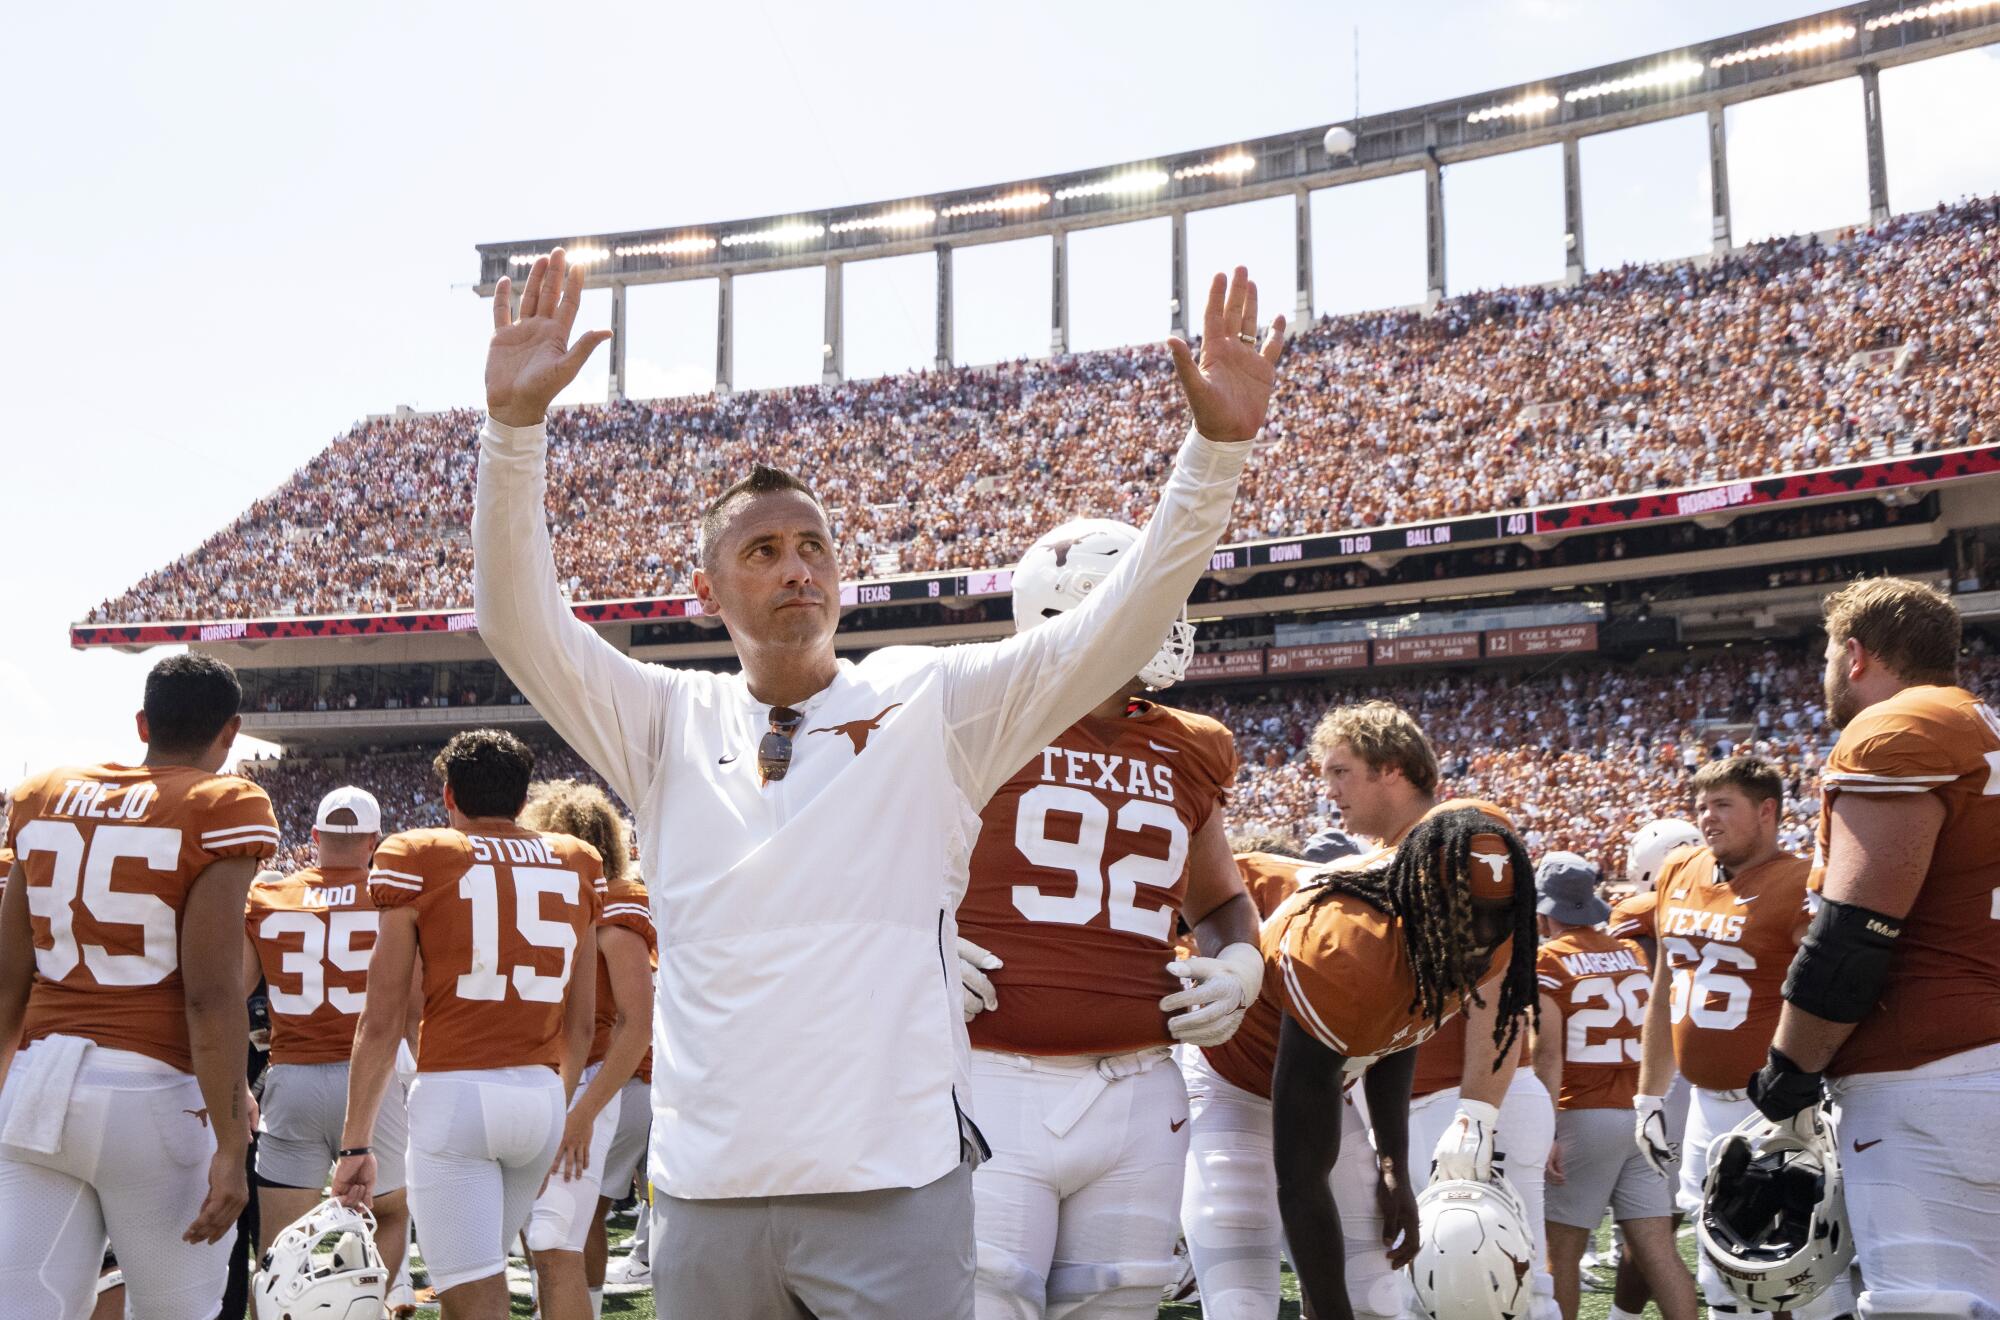 Texas coach Steve Sarkisian waves to the fans after the Longhorns' loss to Alabama.